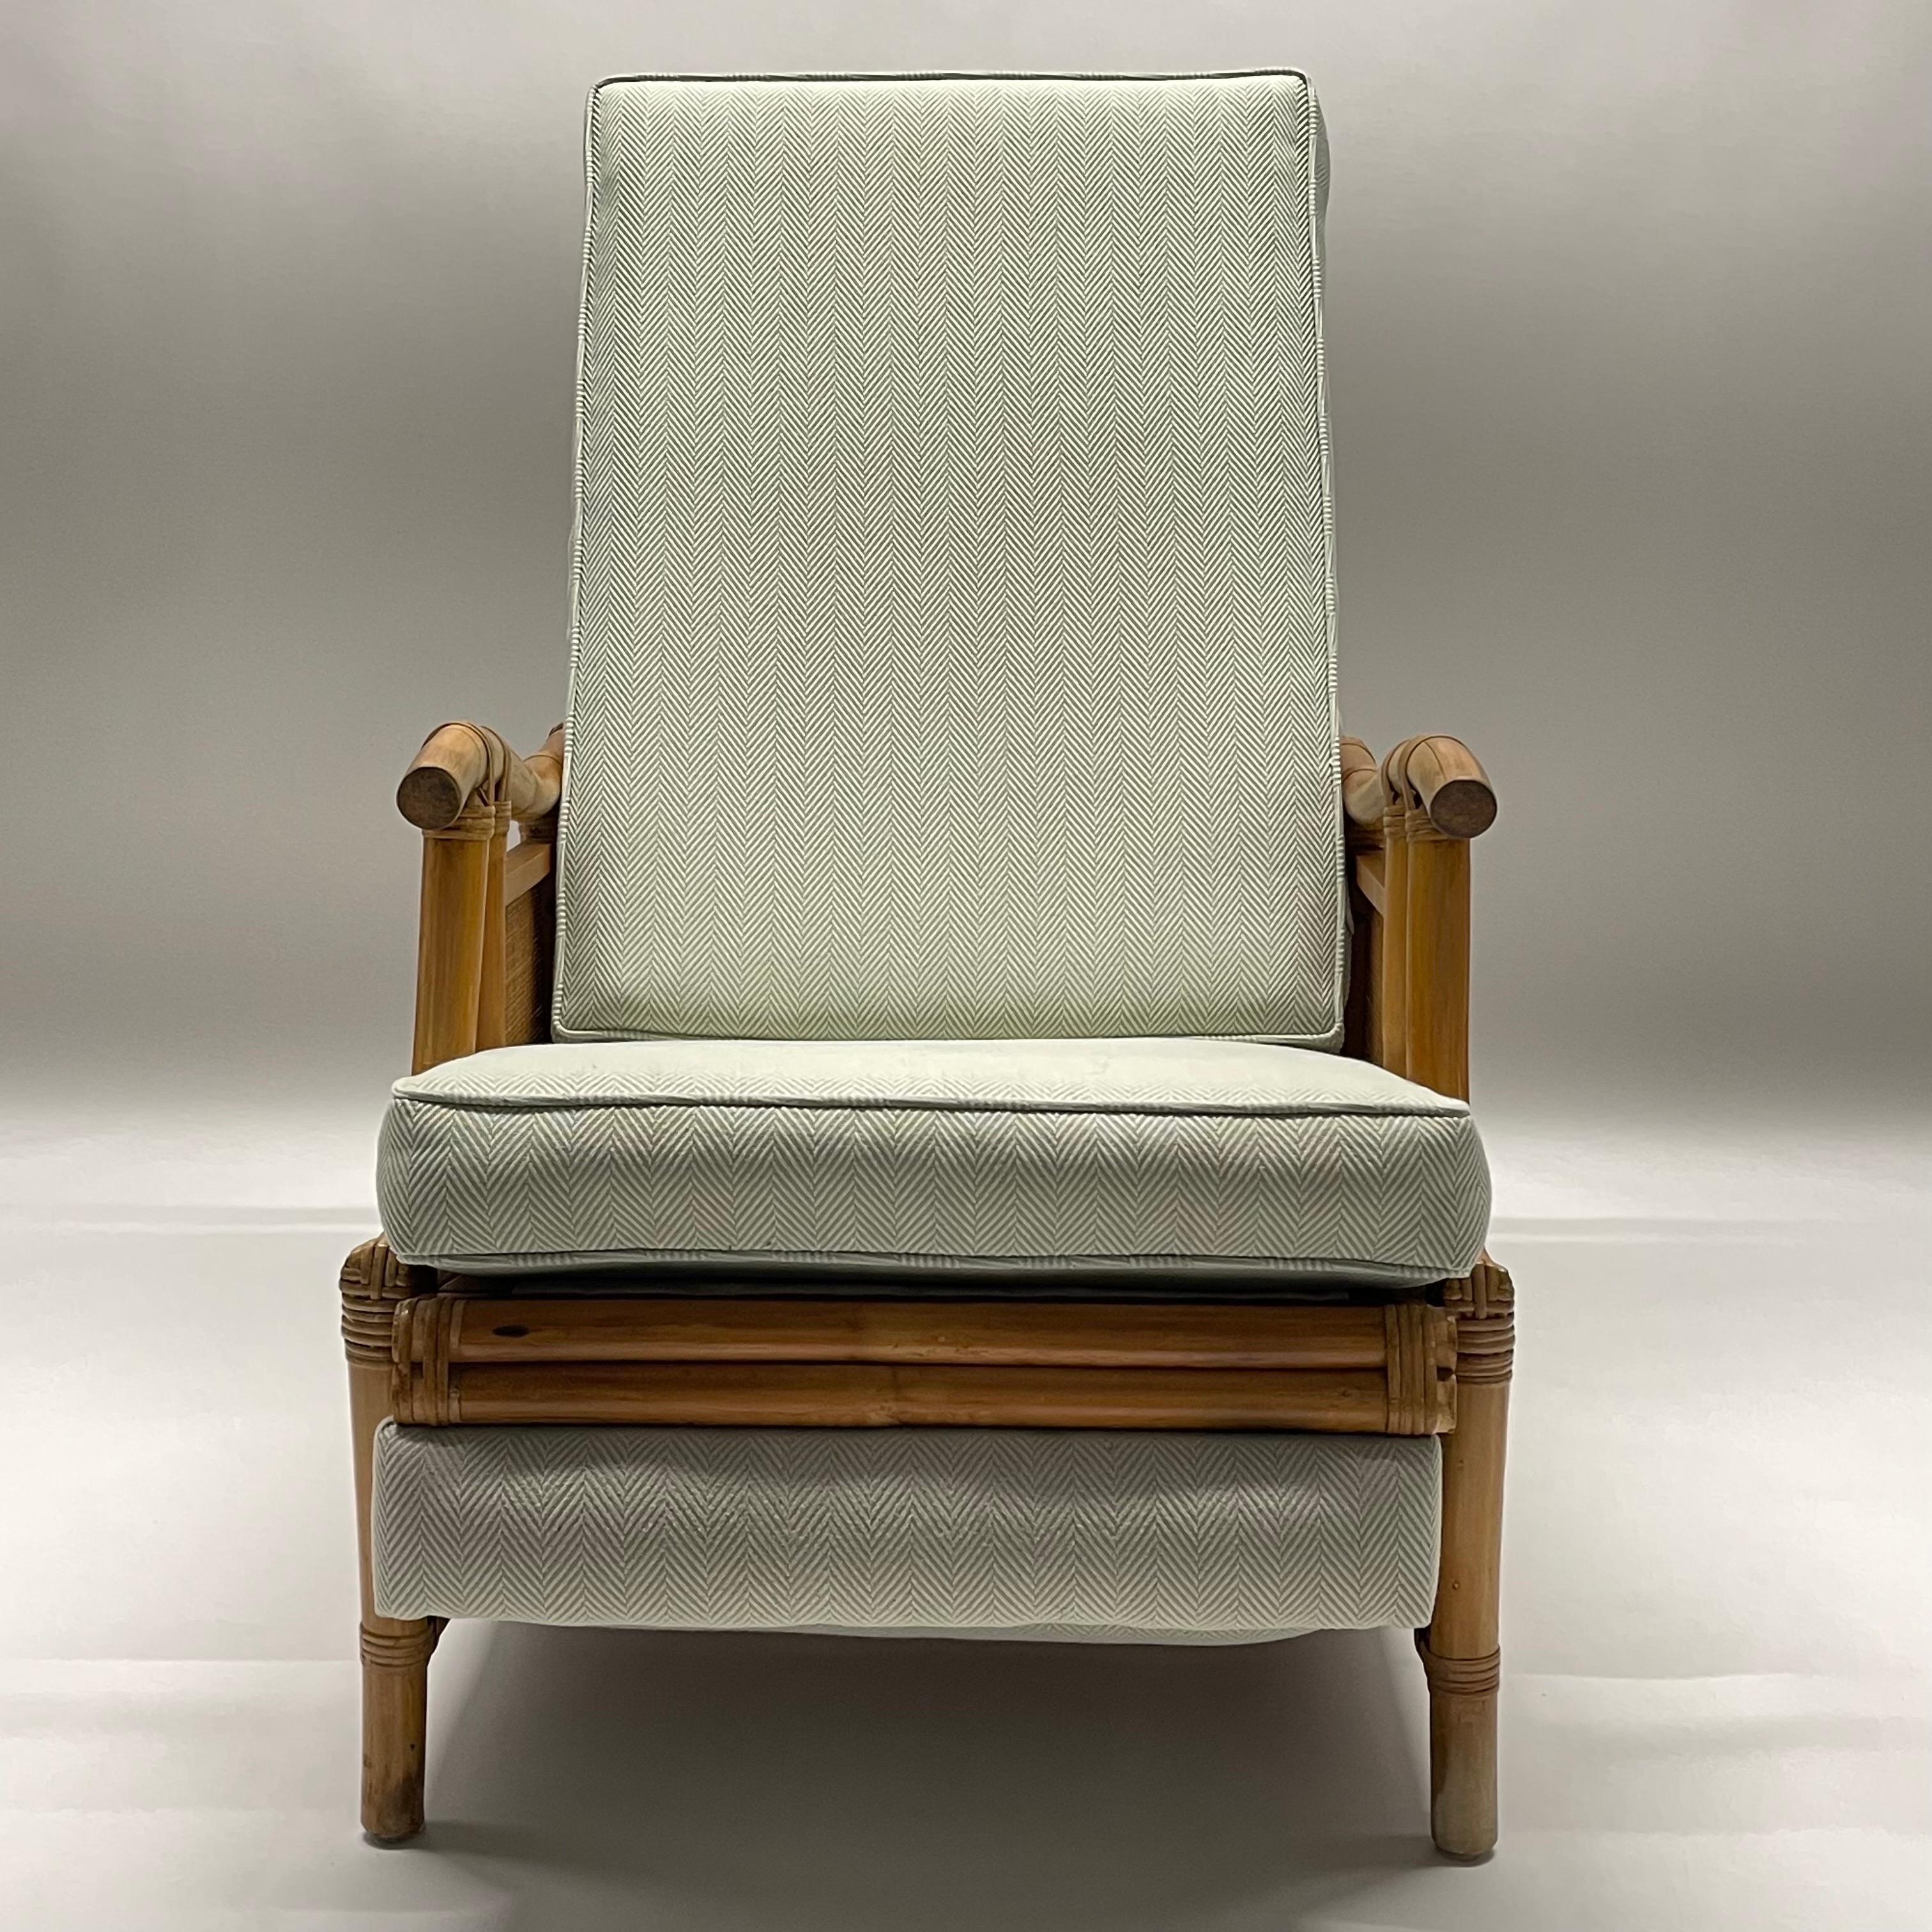 Rare midcentury recliner lounge chair rendered in rattan wicker bamboo and cane with recently upholstered fully removable high-end sage gray green woven herringbone fabric back and seat cushions. Two position reclining options for added comfort, by